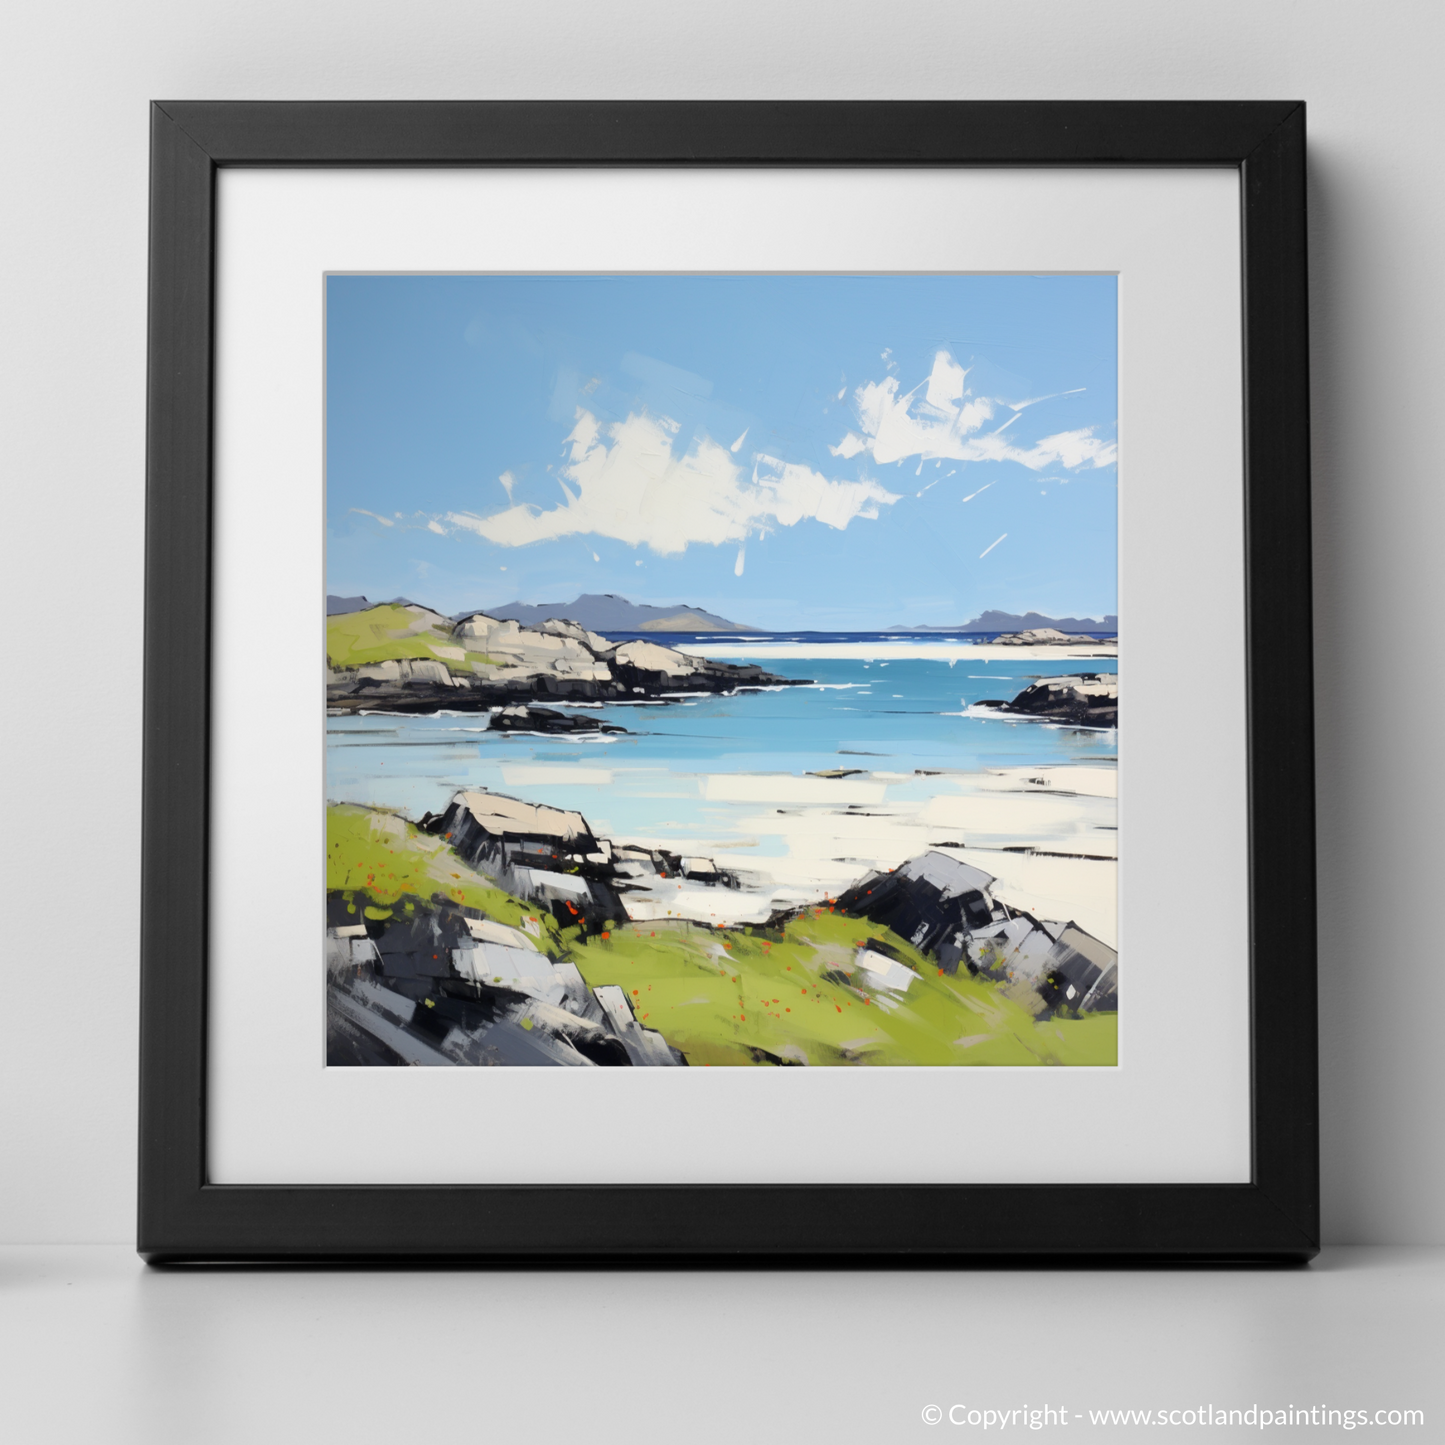 Art Print of Isle of Harris, Outer Hebrides in summer with a black frame